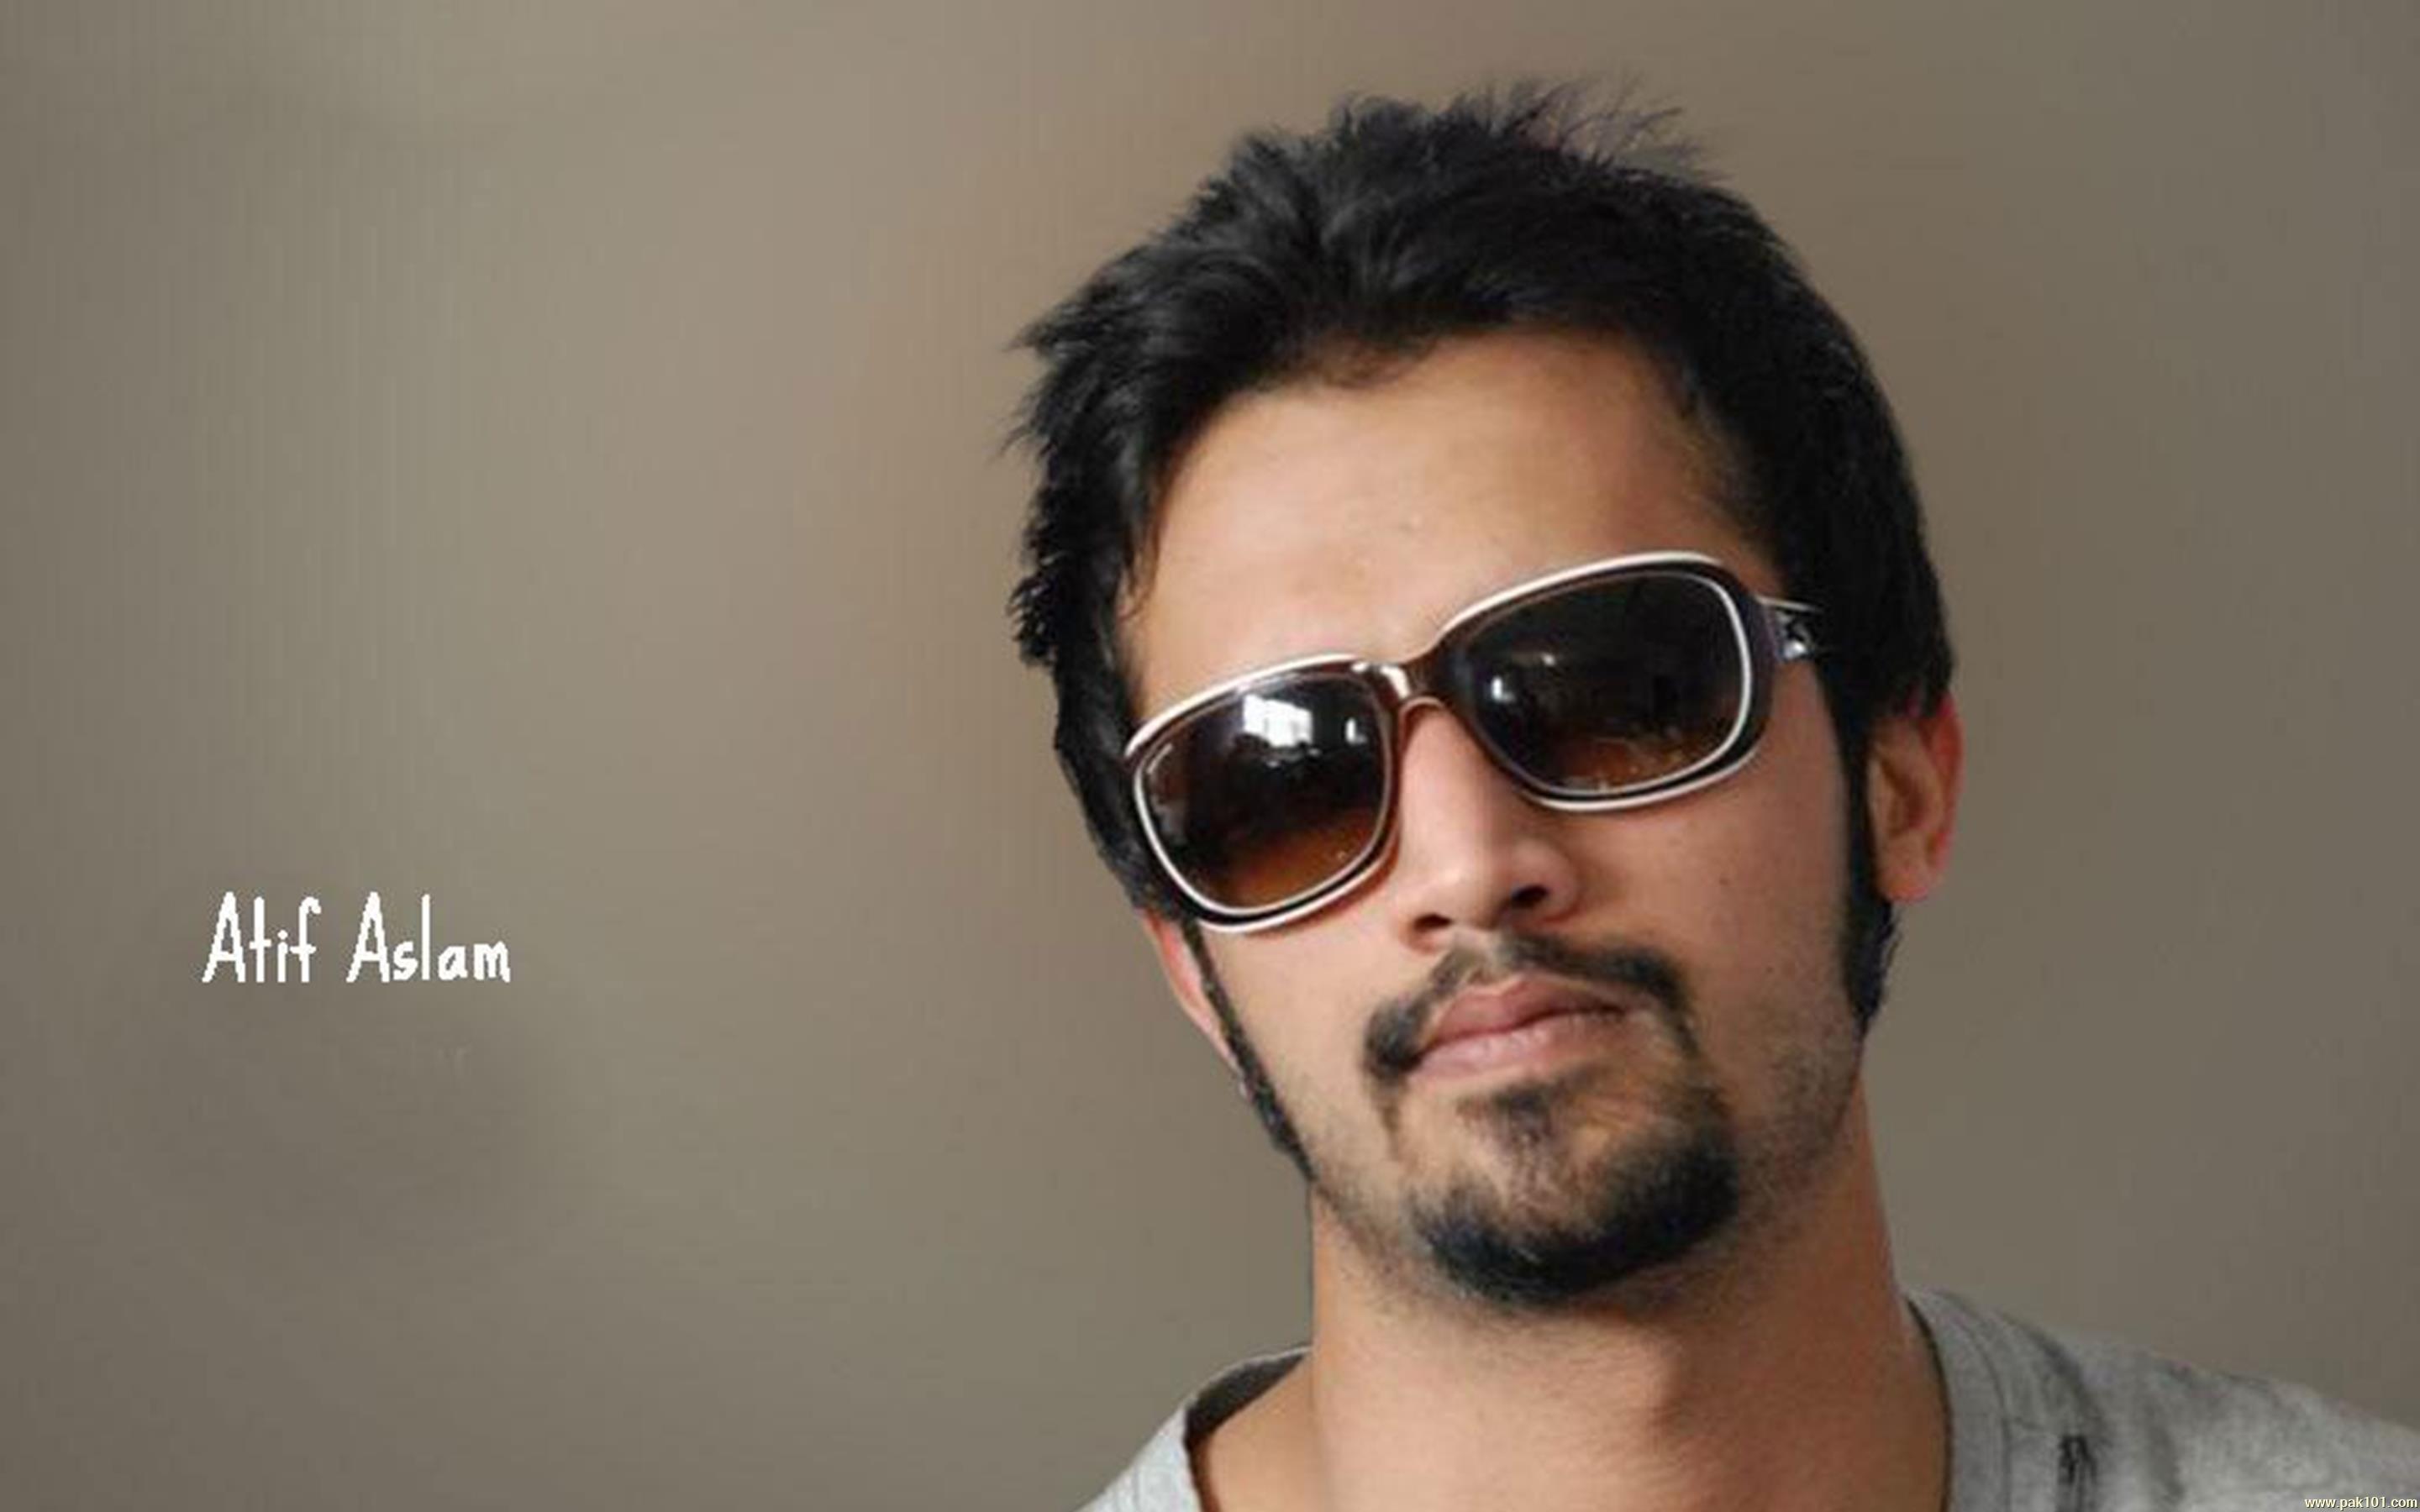 Atif Aslam Wallpapers Image Photos Pictures Backgrounds.